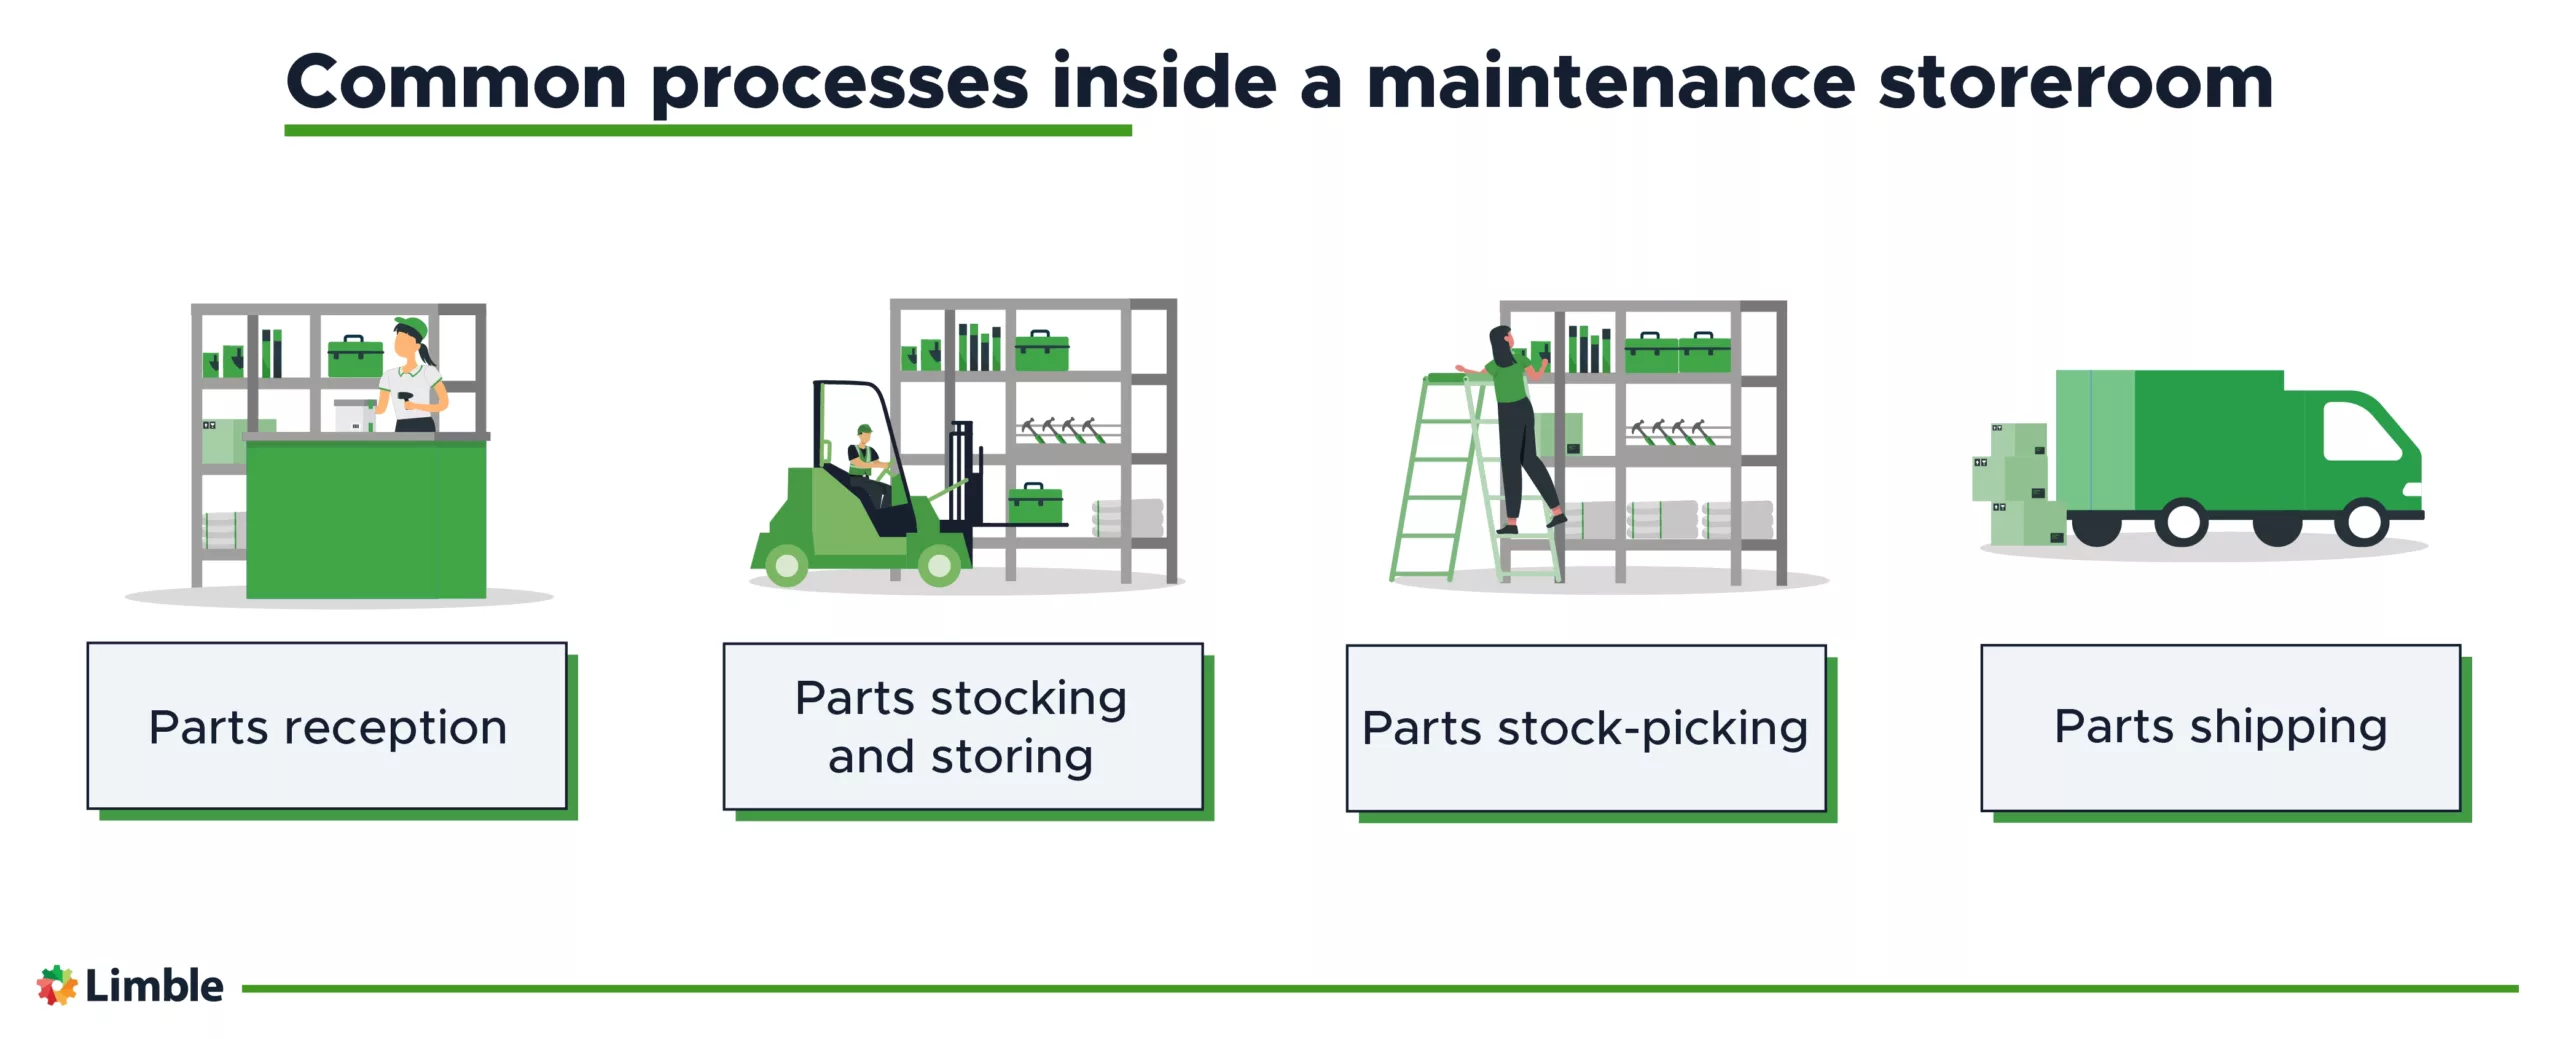 List of the most common processes inside a maintenance storeroom.